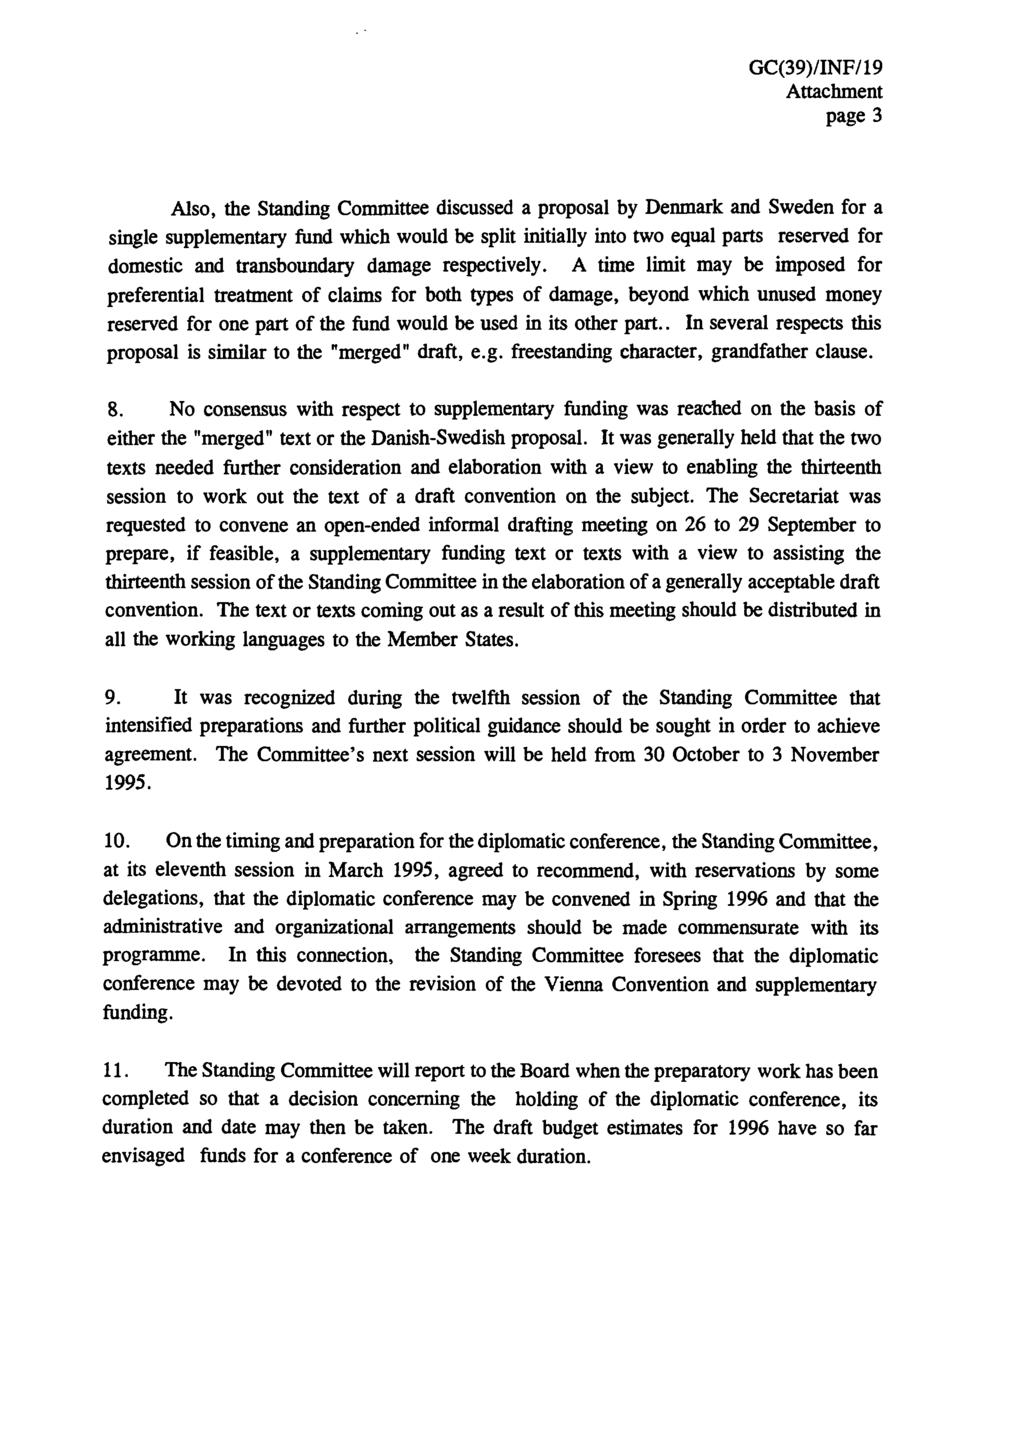 GC(39)/INF/19 Attachment page 3 Also, the Standing Committee discussed a proposal by Denmark and Sweden for a single supplementary fund which would be split initially into two equal parts reserved